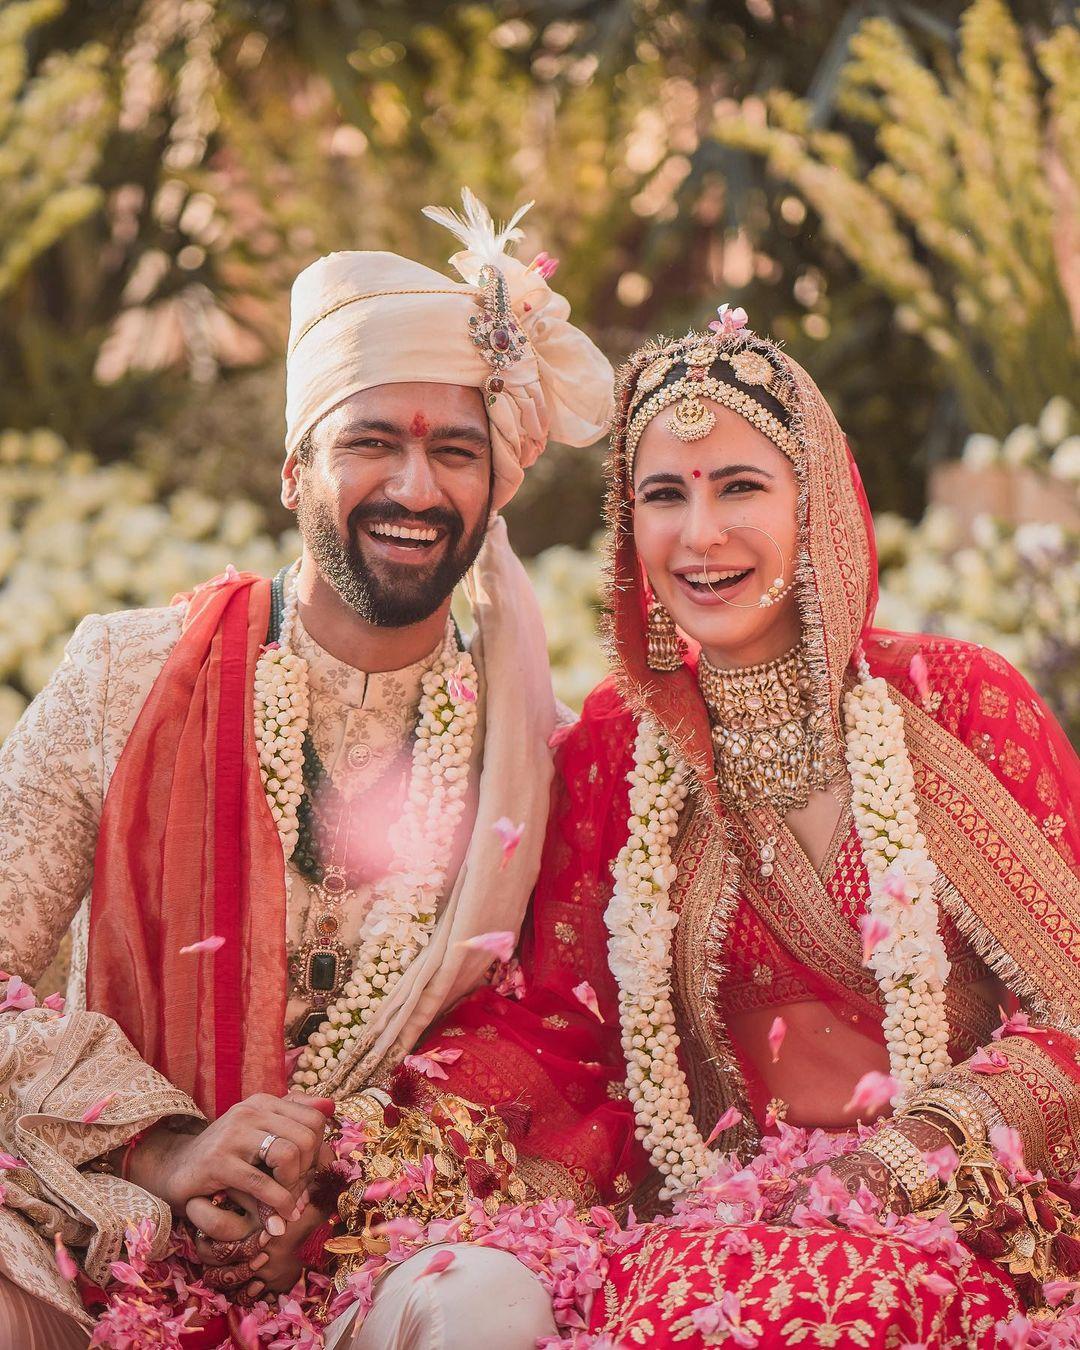 Katrina Kaif and Vicky Kaushal tied the knot back in December 2021 at Six Senses Fort Barwara in Rajasthan's Sawai Madhopur district. While we never got a lot of intimate footage, the photos, including the ones from their big day, overlooking the sunset, were as dreamy as it could get